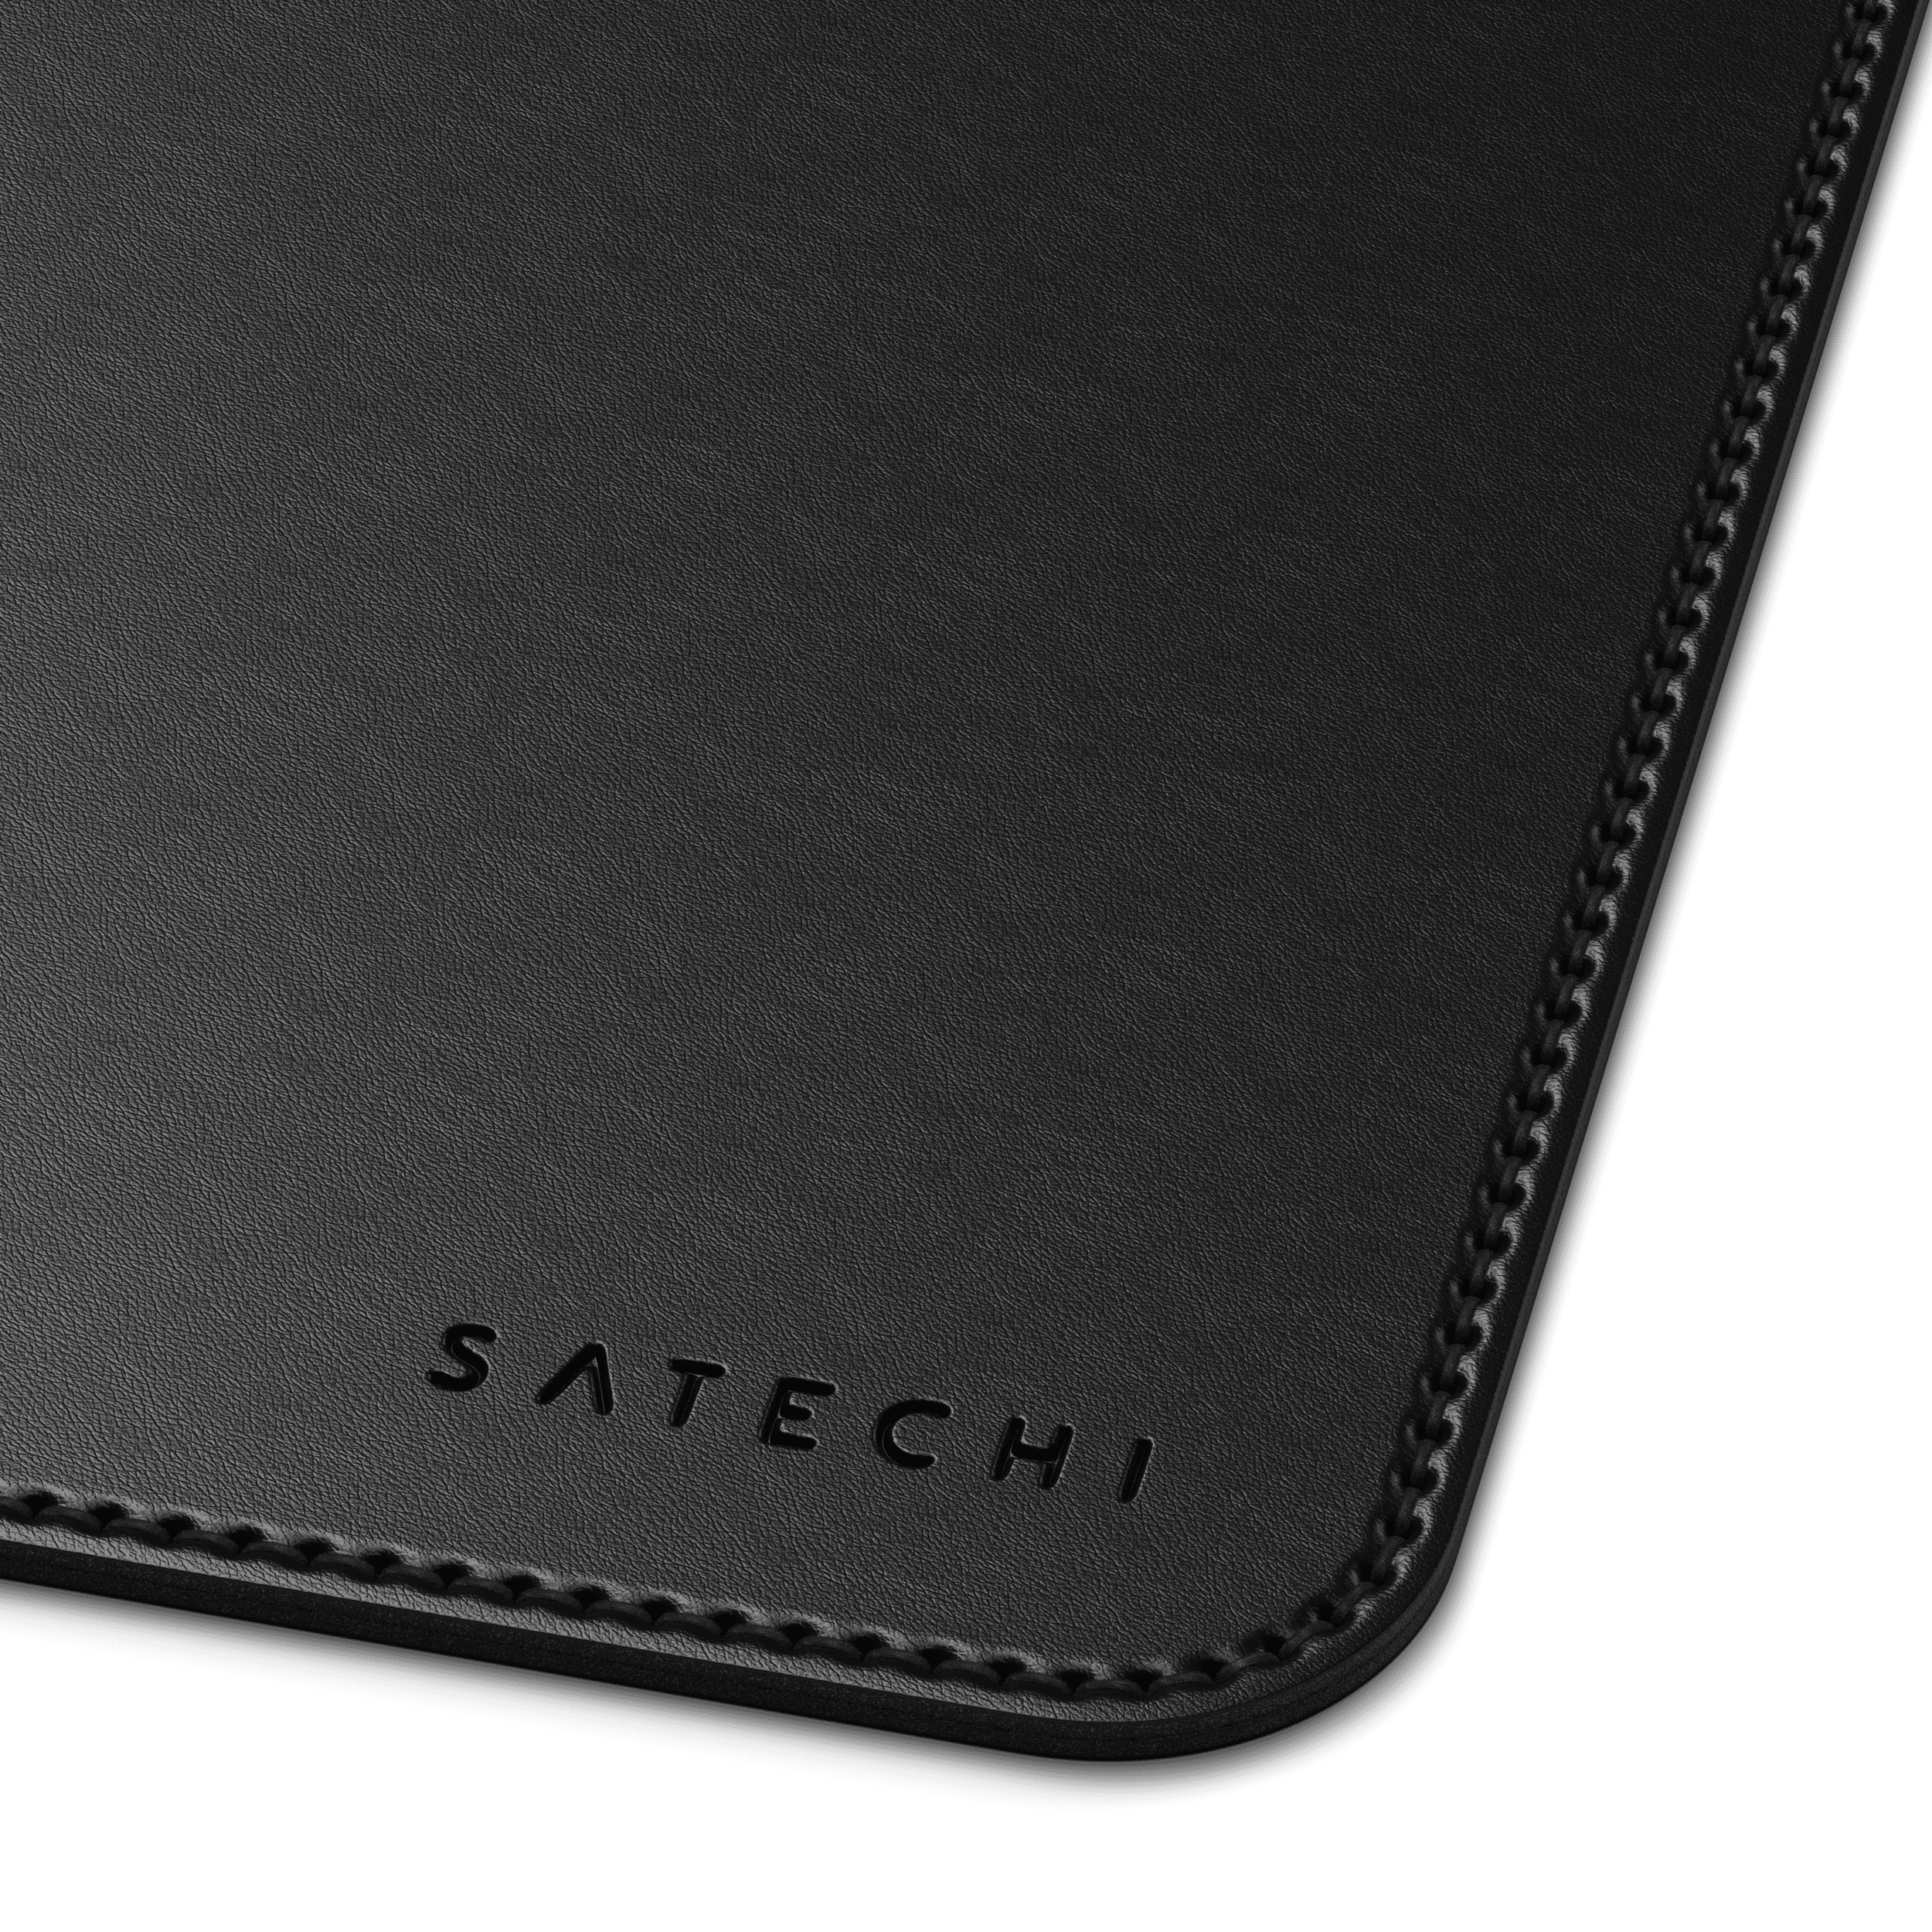 Eco-Leather Mouse Pad - Eco Friendly - Satechi